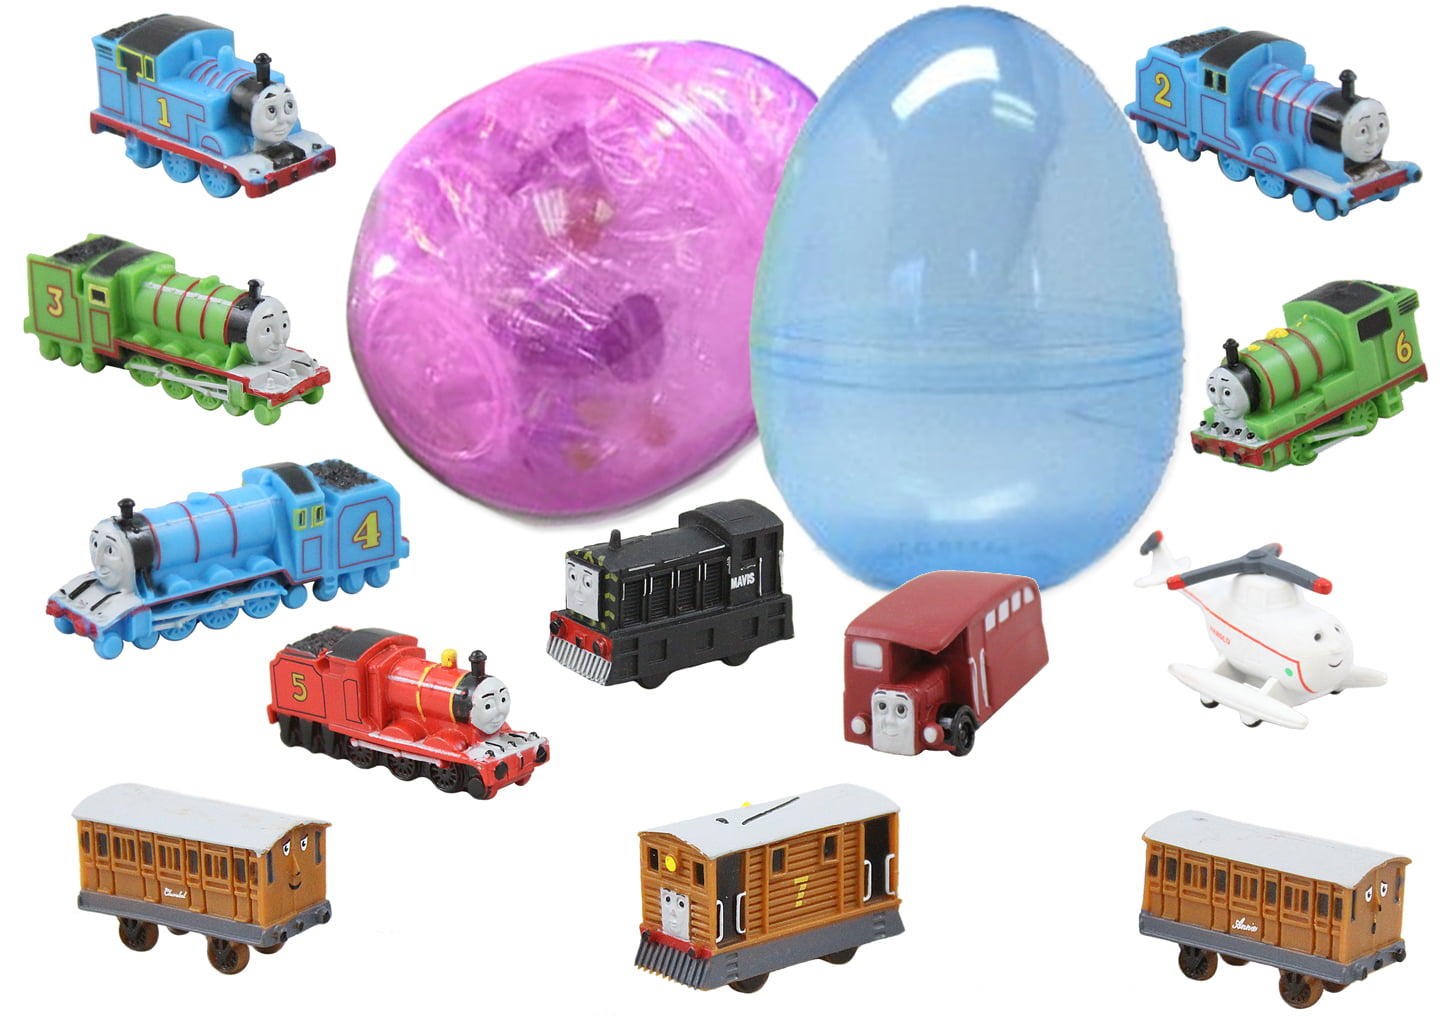 Prefilled Easter Eggs Save Your Time Durable 6 Inch Egg in Bright Colorful Designs Perfect As Cake Toppers And Kids Party 1 Jumbo Toy Filled Easter Egg With 12 Thomas The Train Figures